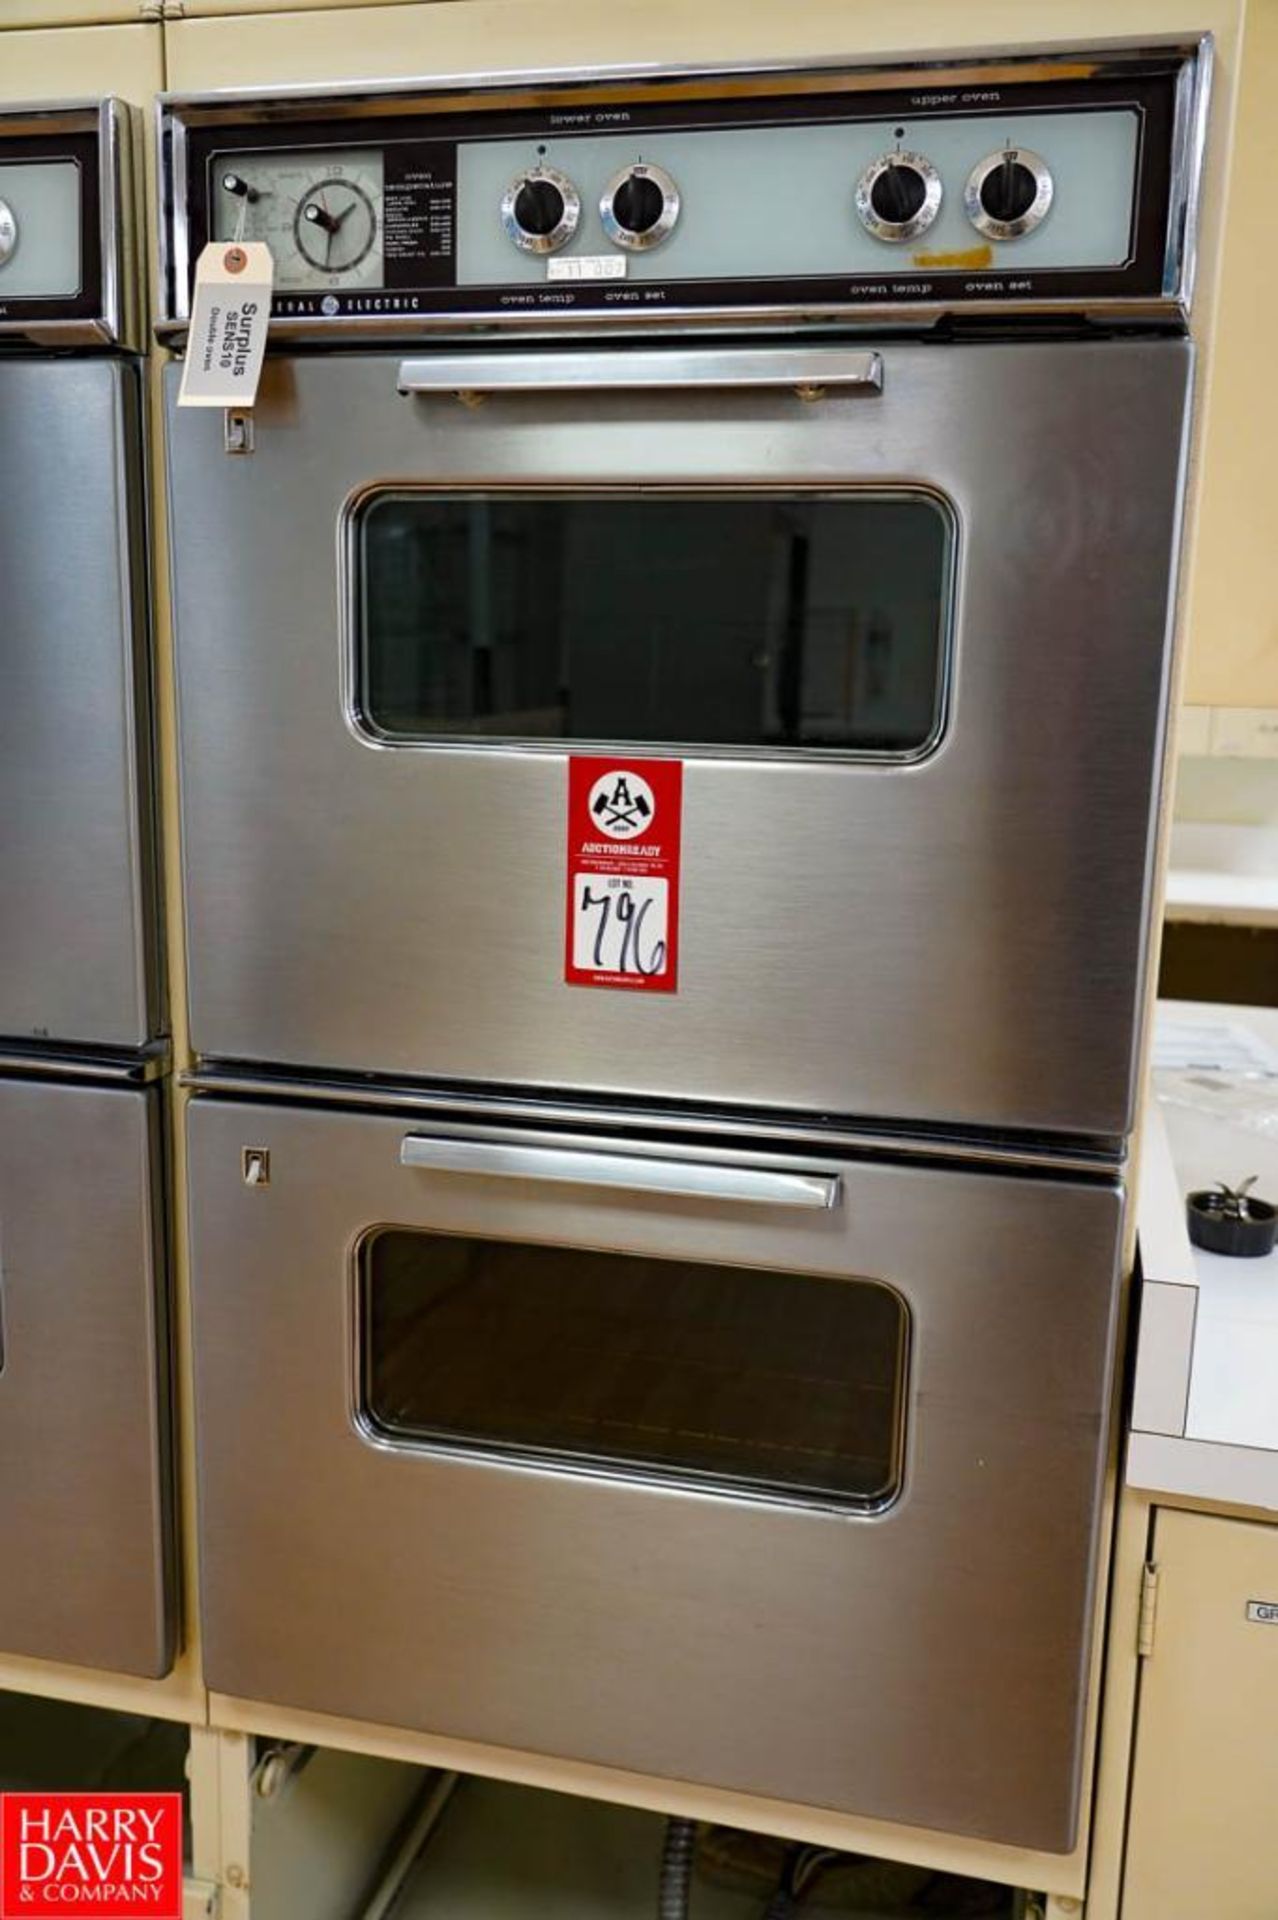 General Electric Double Oven 26'' x 27'' x 87'' Tall, Max Temp 500 and Broil - Rigging Fee: $100